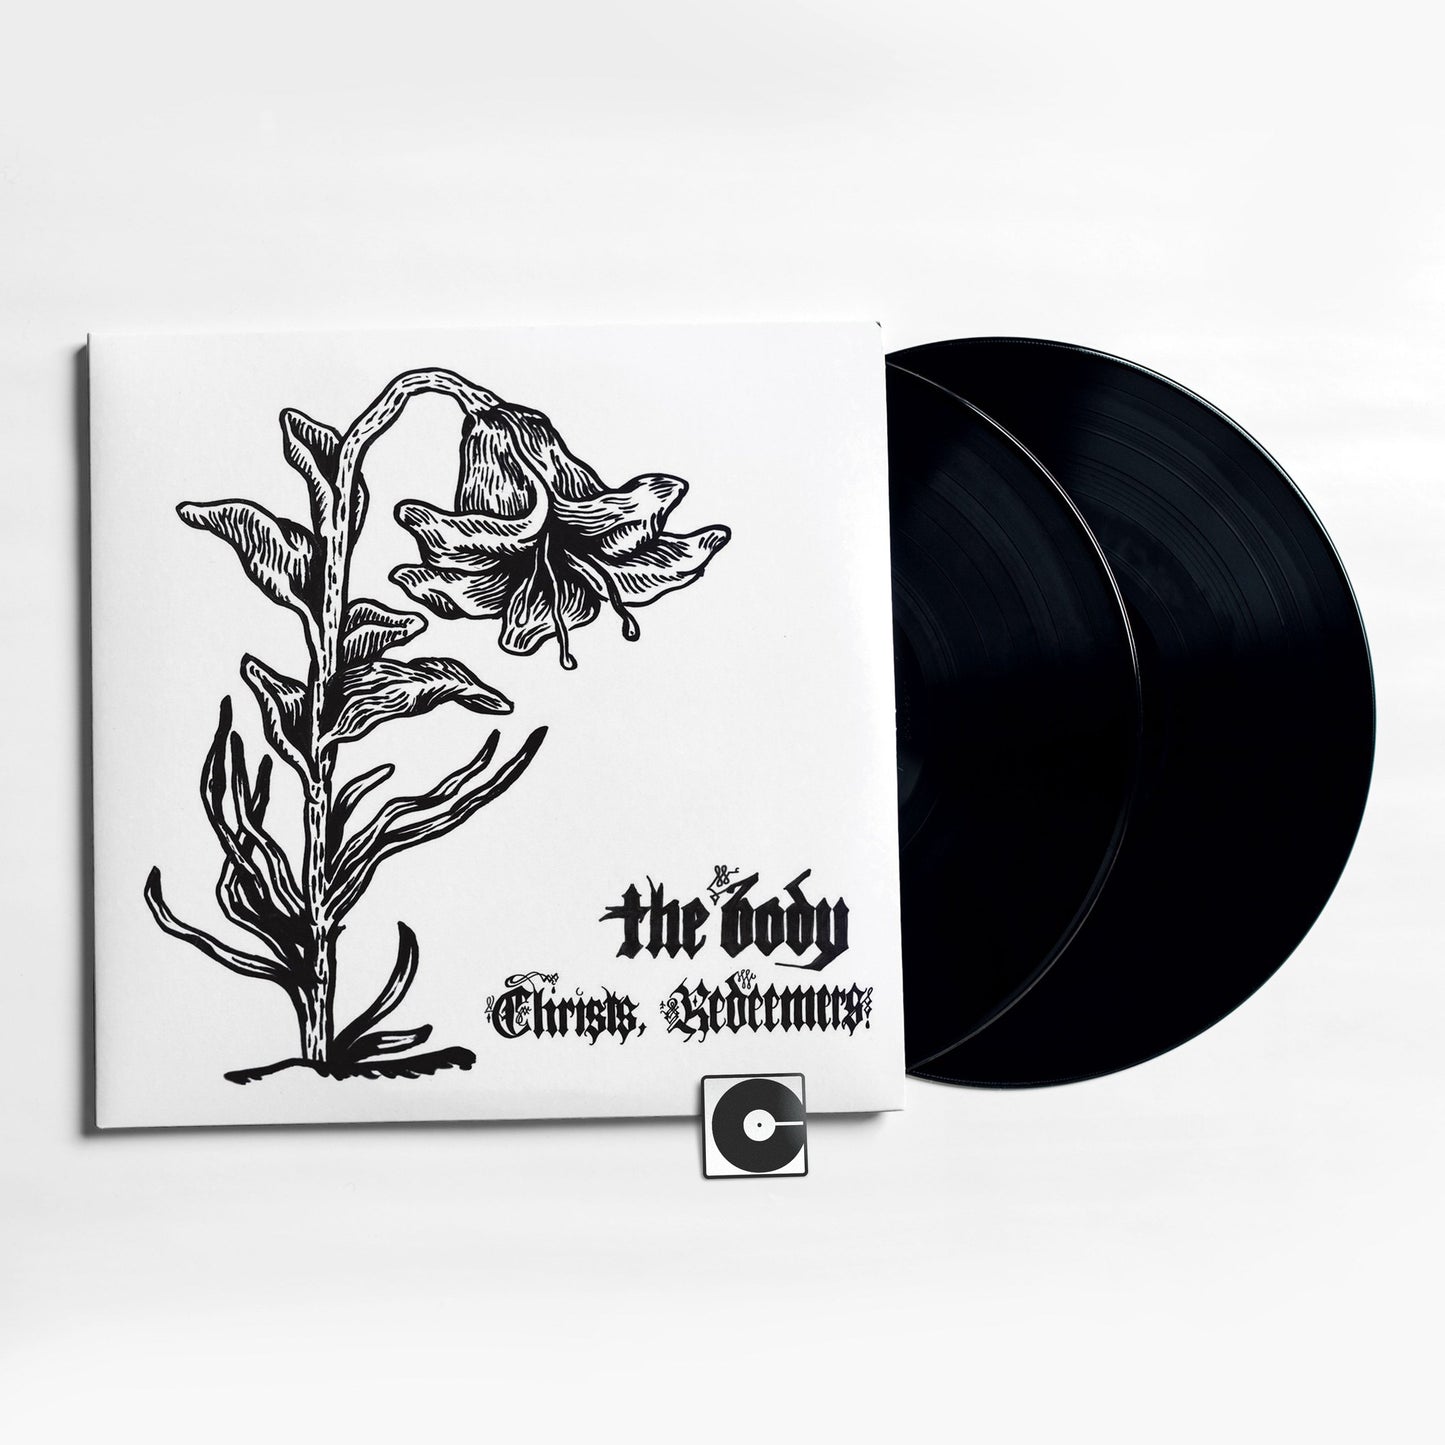 The Body - "Christs, Redeemers"